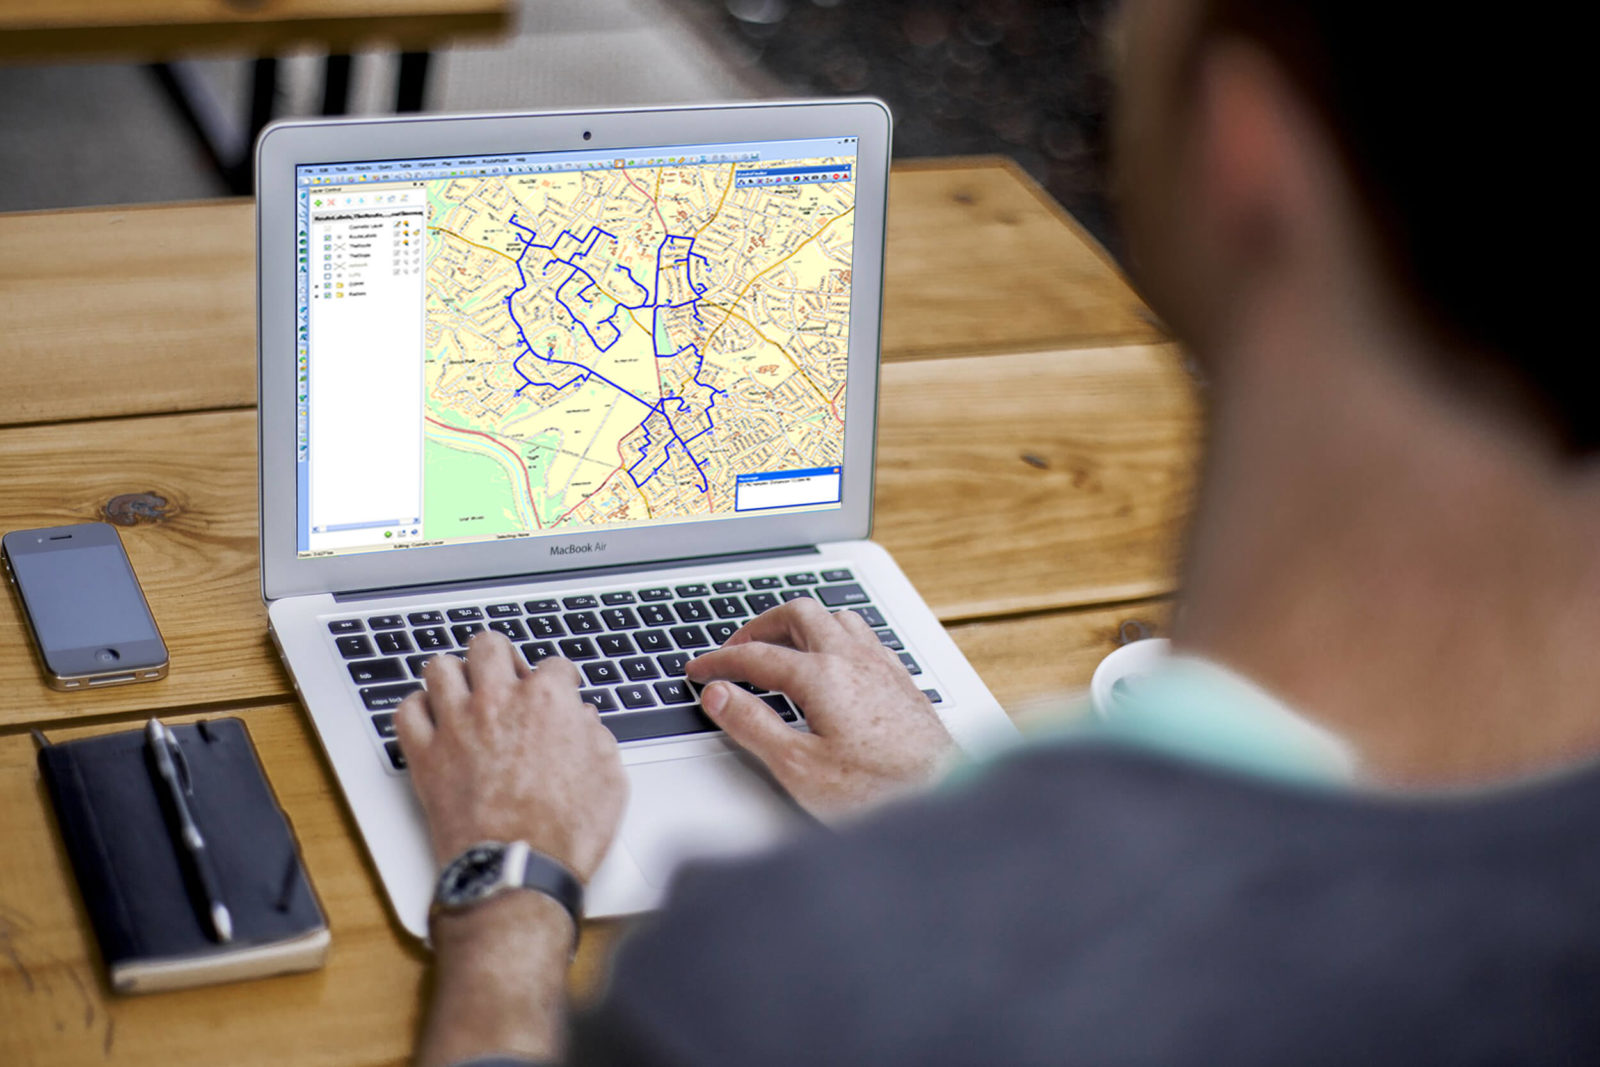 RouteFinder plug-in for MapInfo on laptop